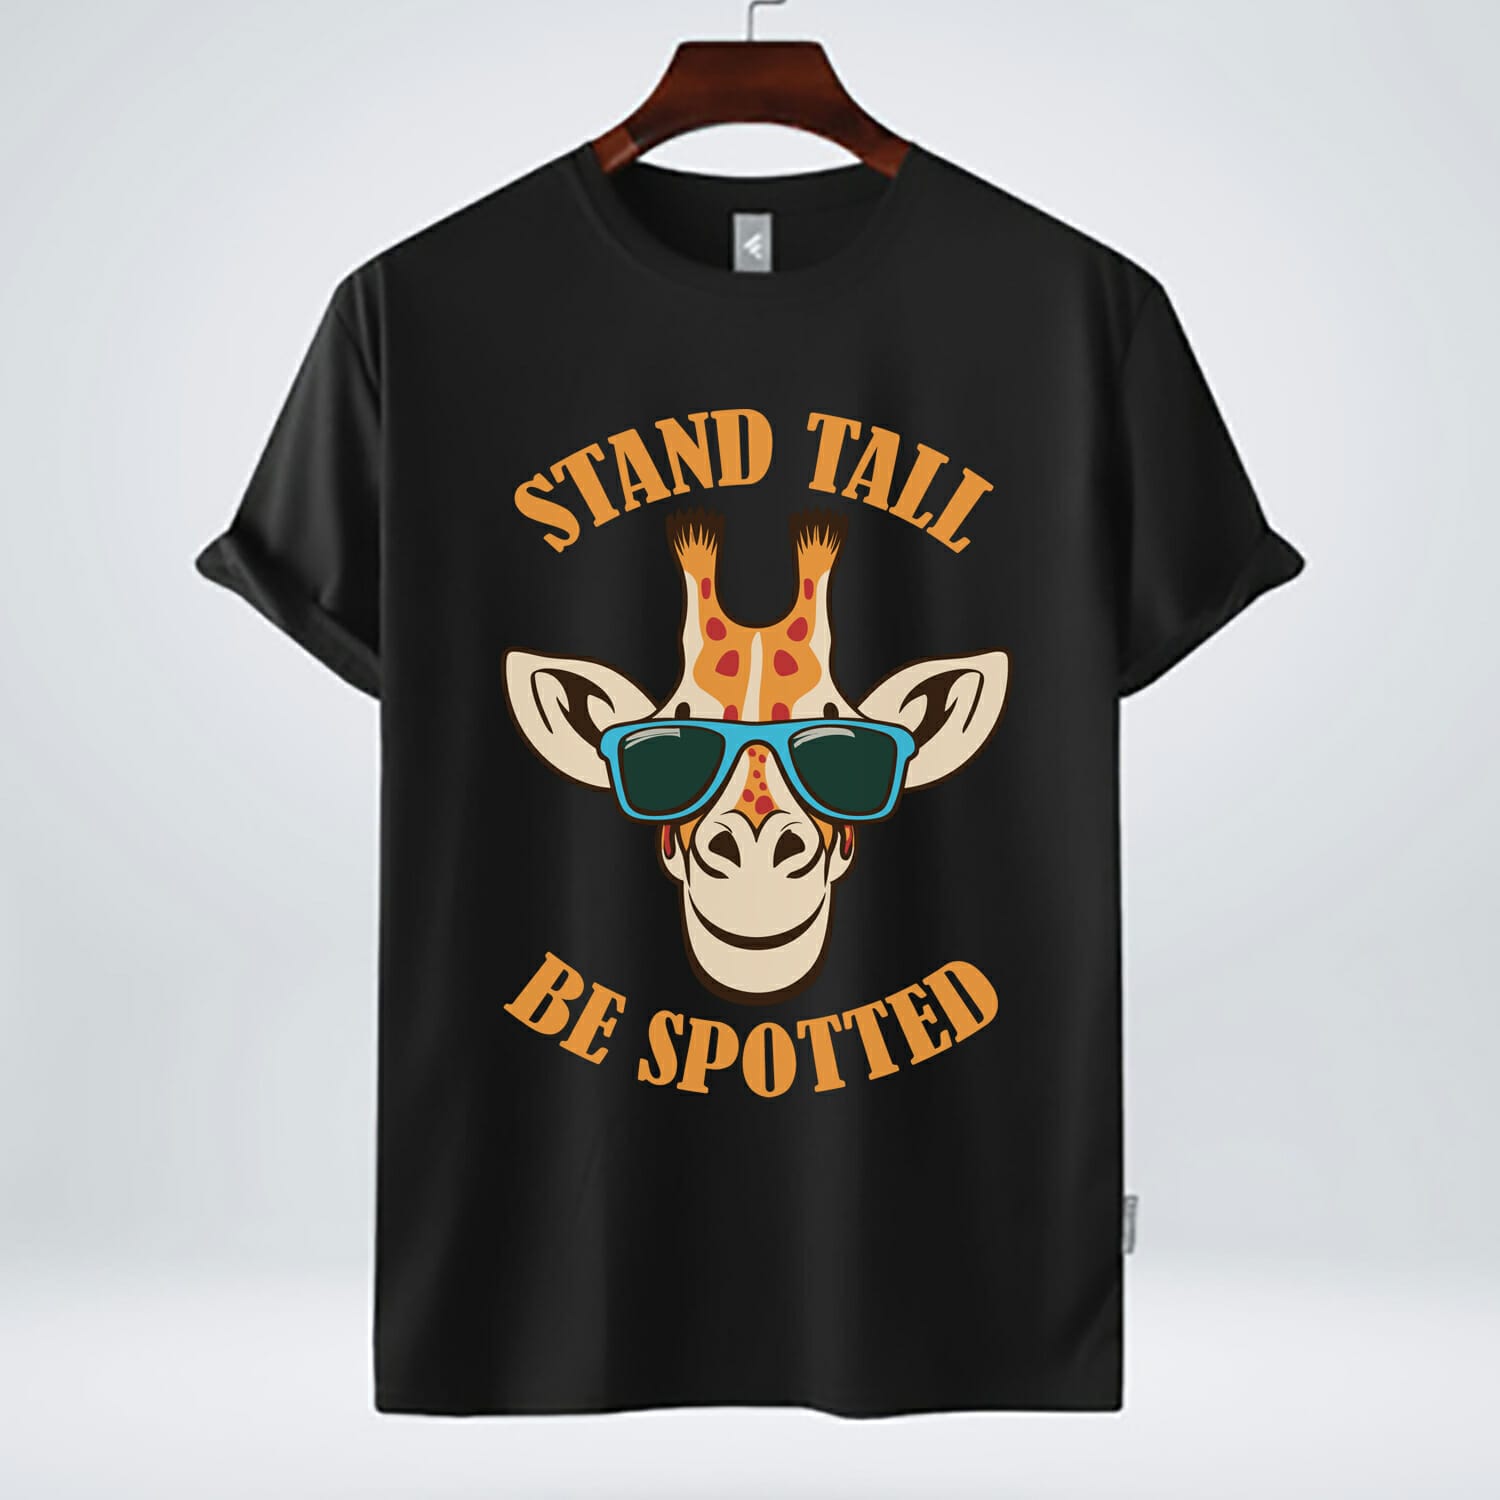 Stand Tall be spotted free t shirt design